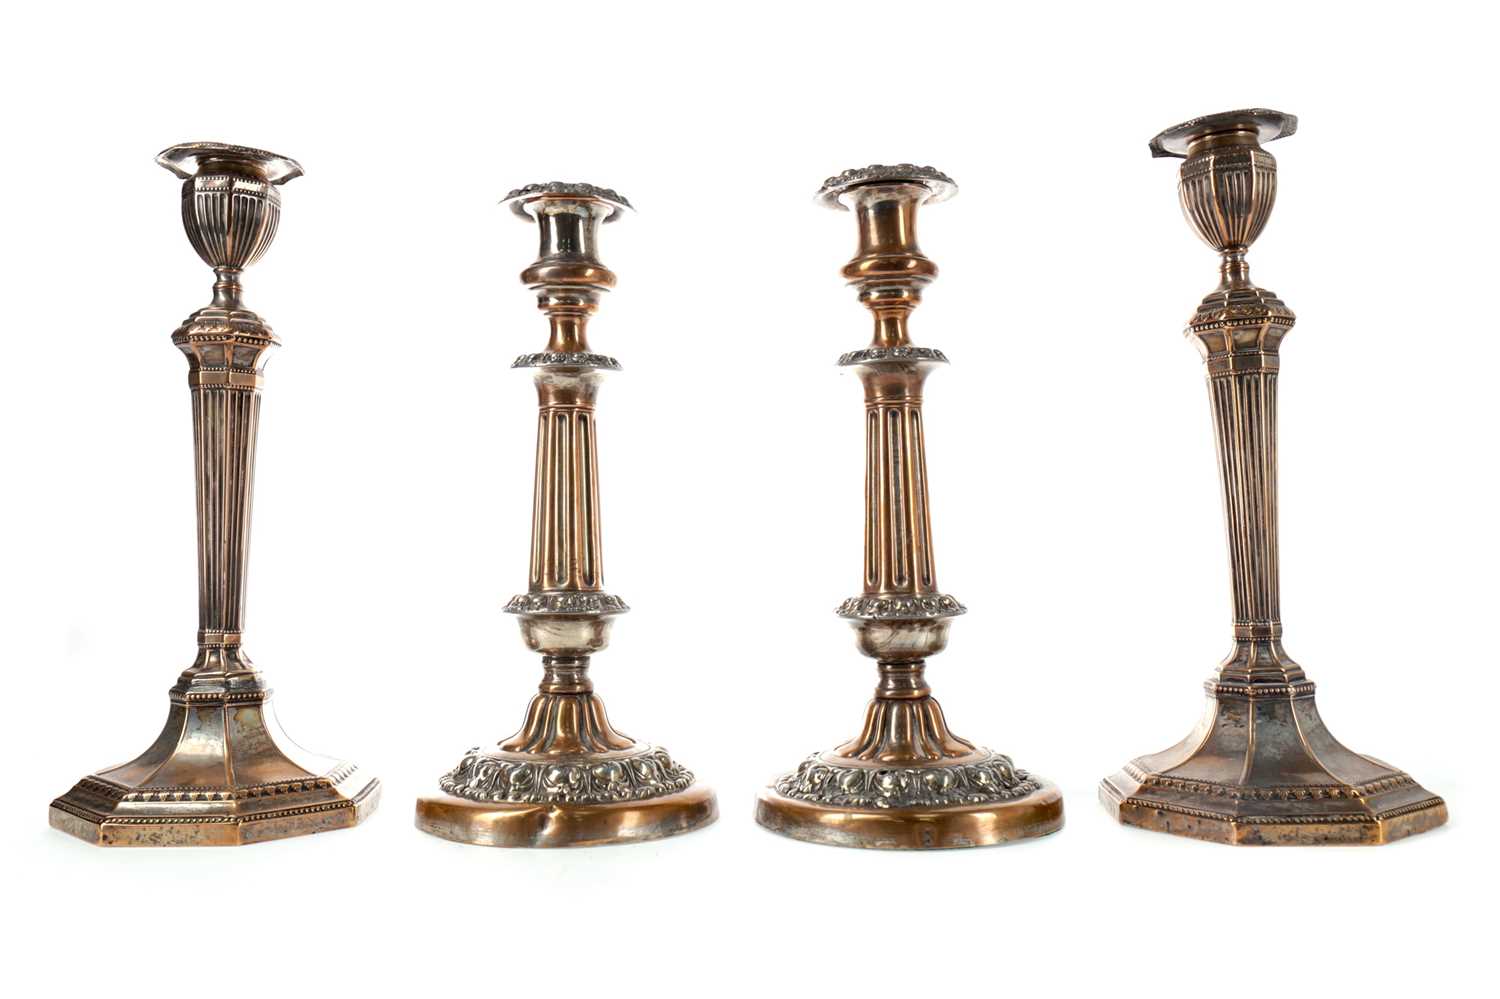 Lot 94 - TWO PAIRS OF MID-19TH CENTURY SHEFFIELD PLATE CANDLESTICKS AND A CANDELABRUM